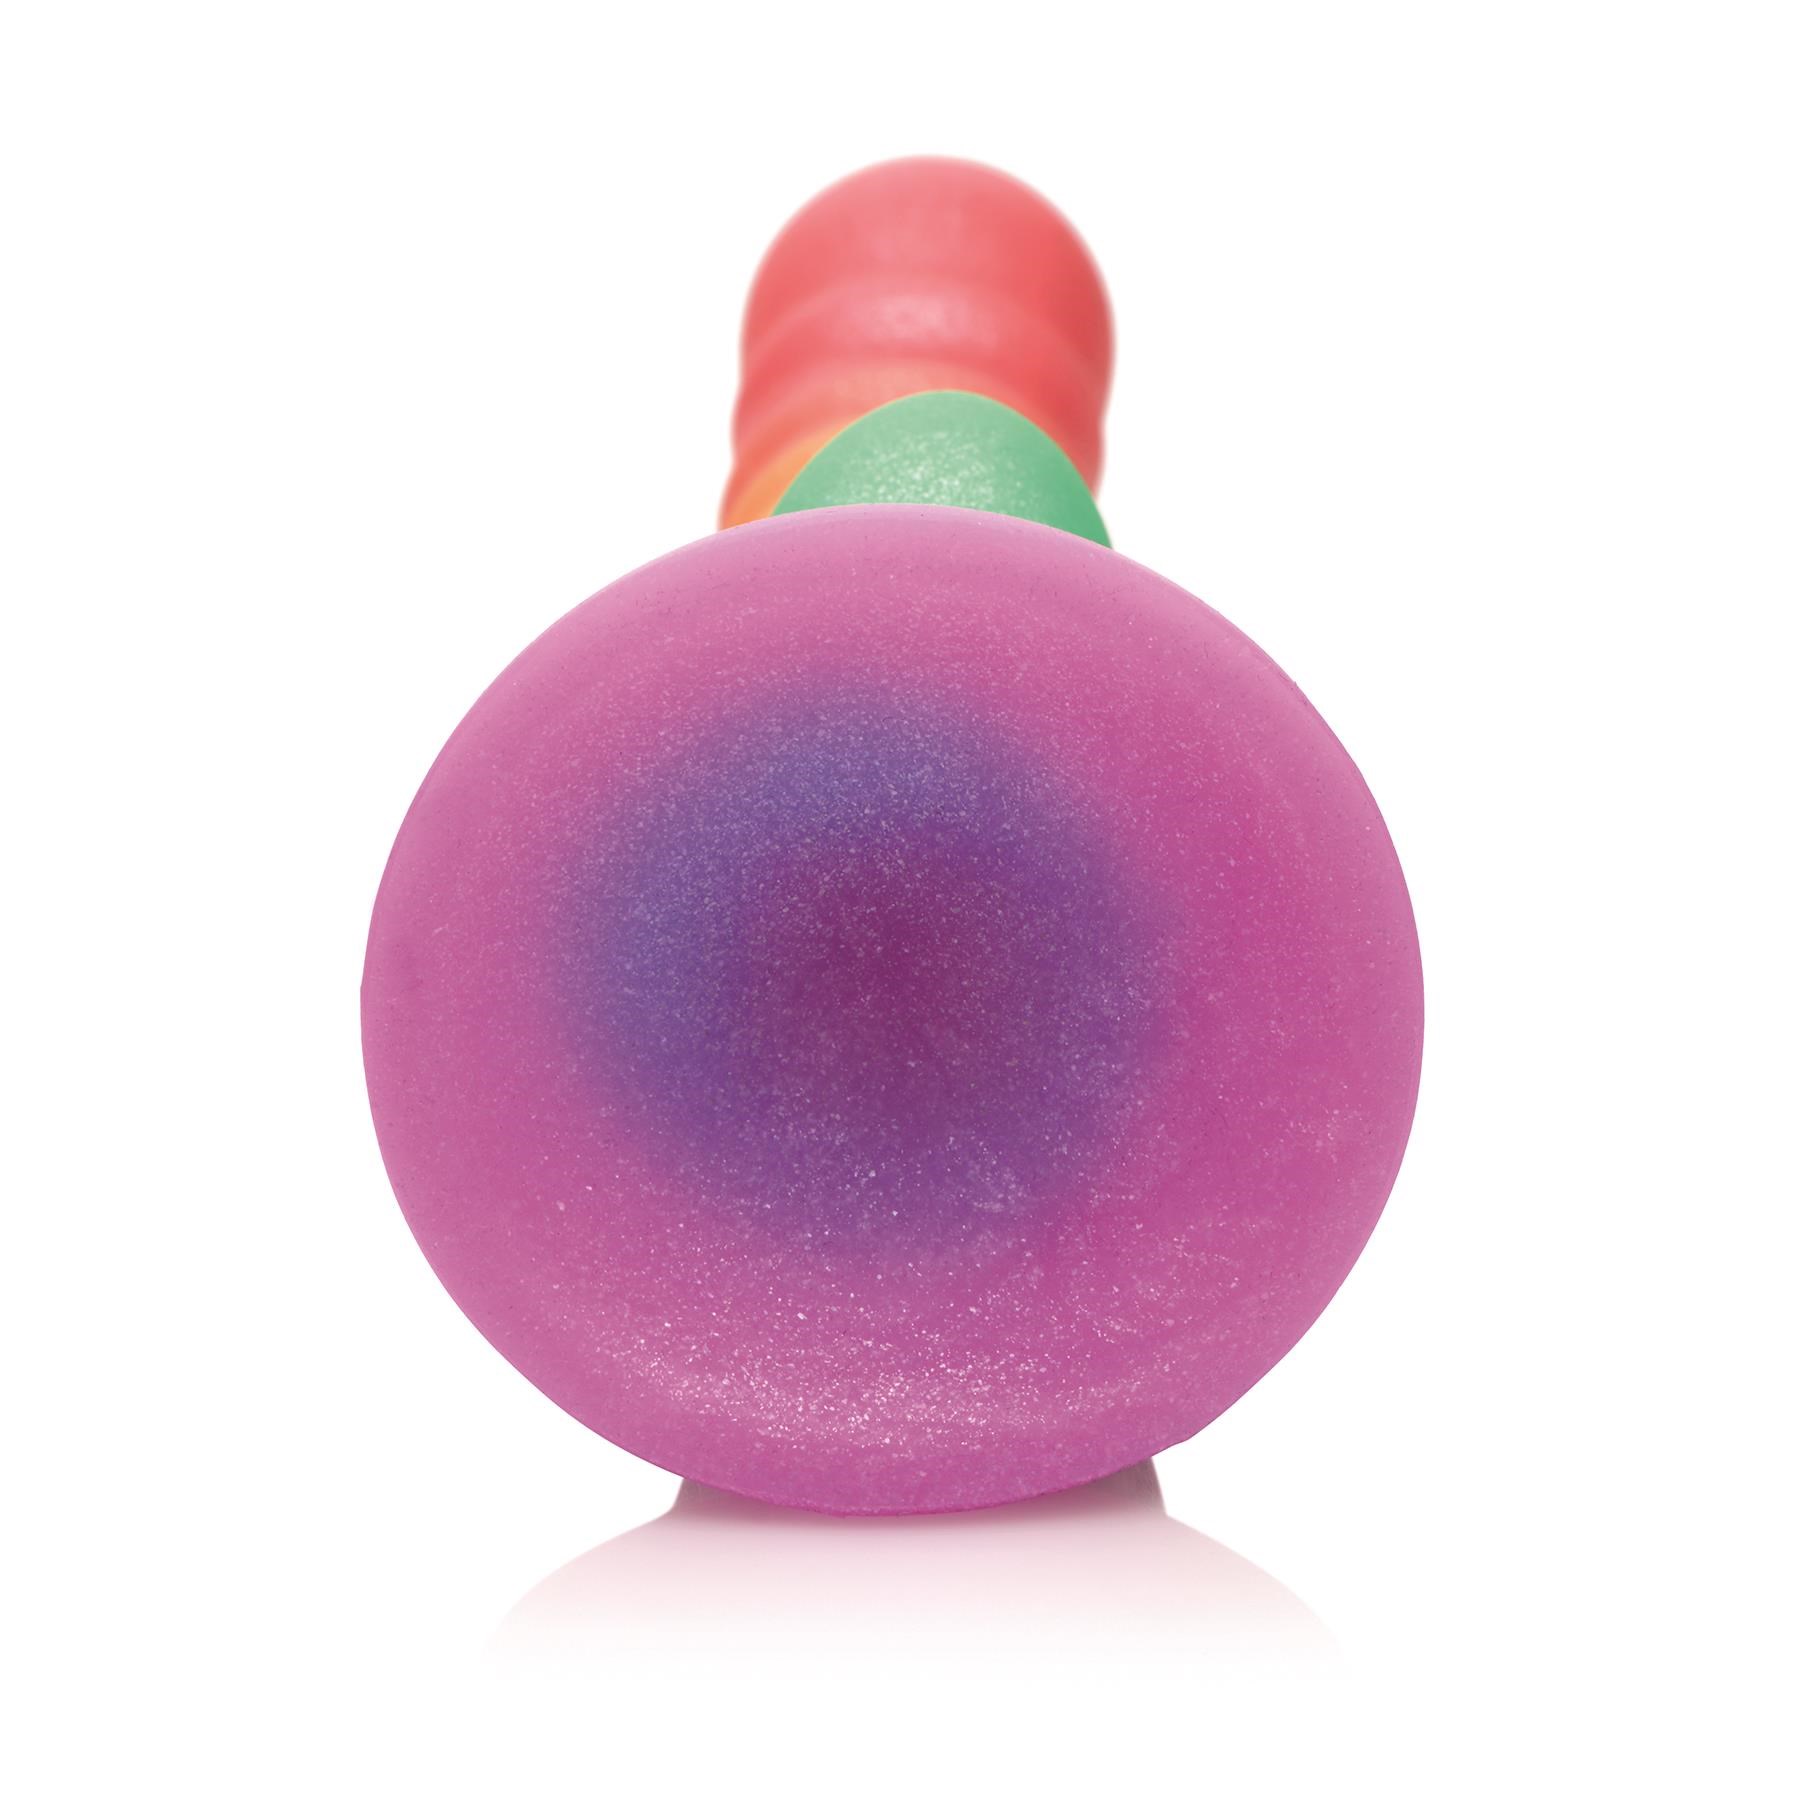 Simply Sweet Ribbed Rainbow Dildo - Product Shot #5 - Showing Suction Cup